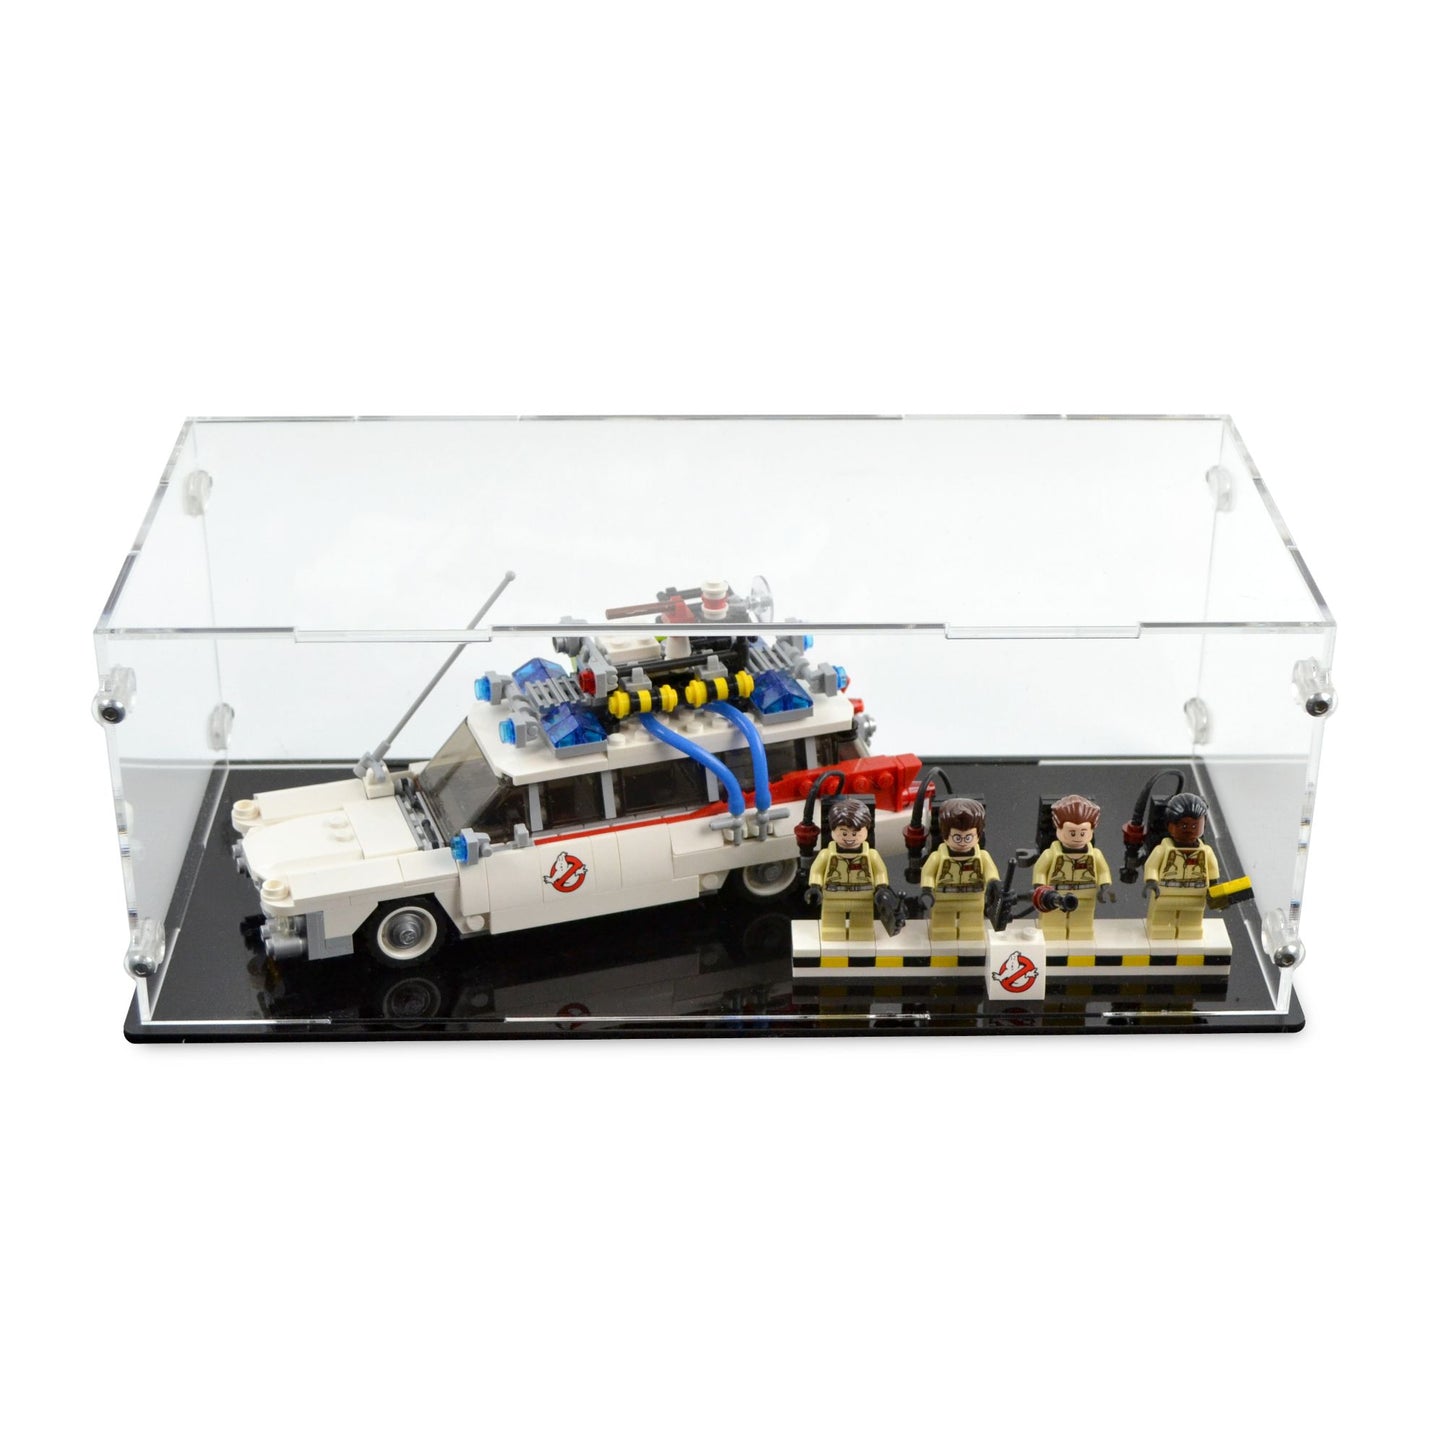 21108 Ghostbusters Ecto-1 Display Case